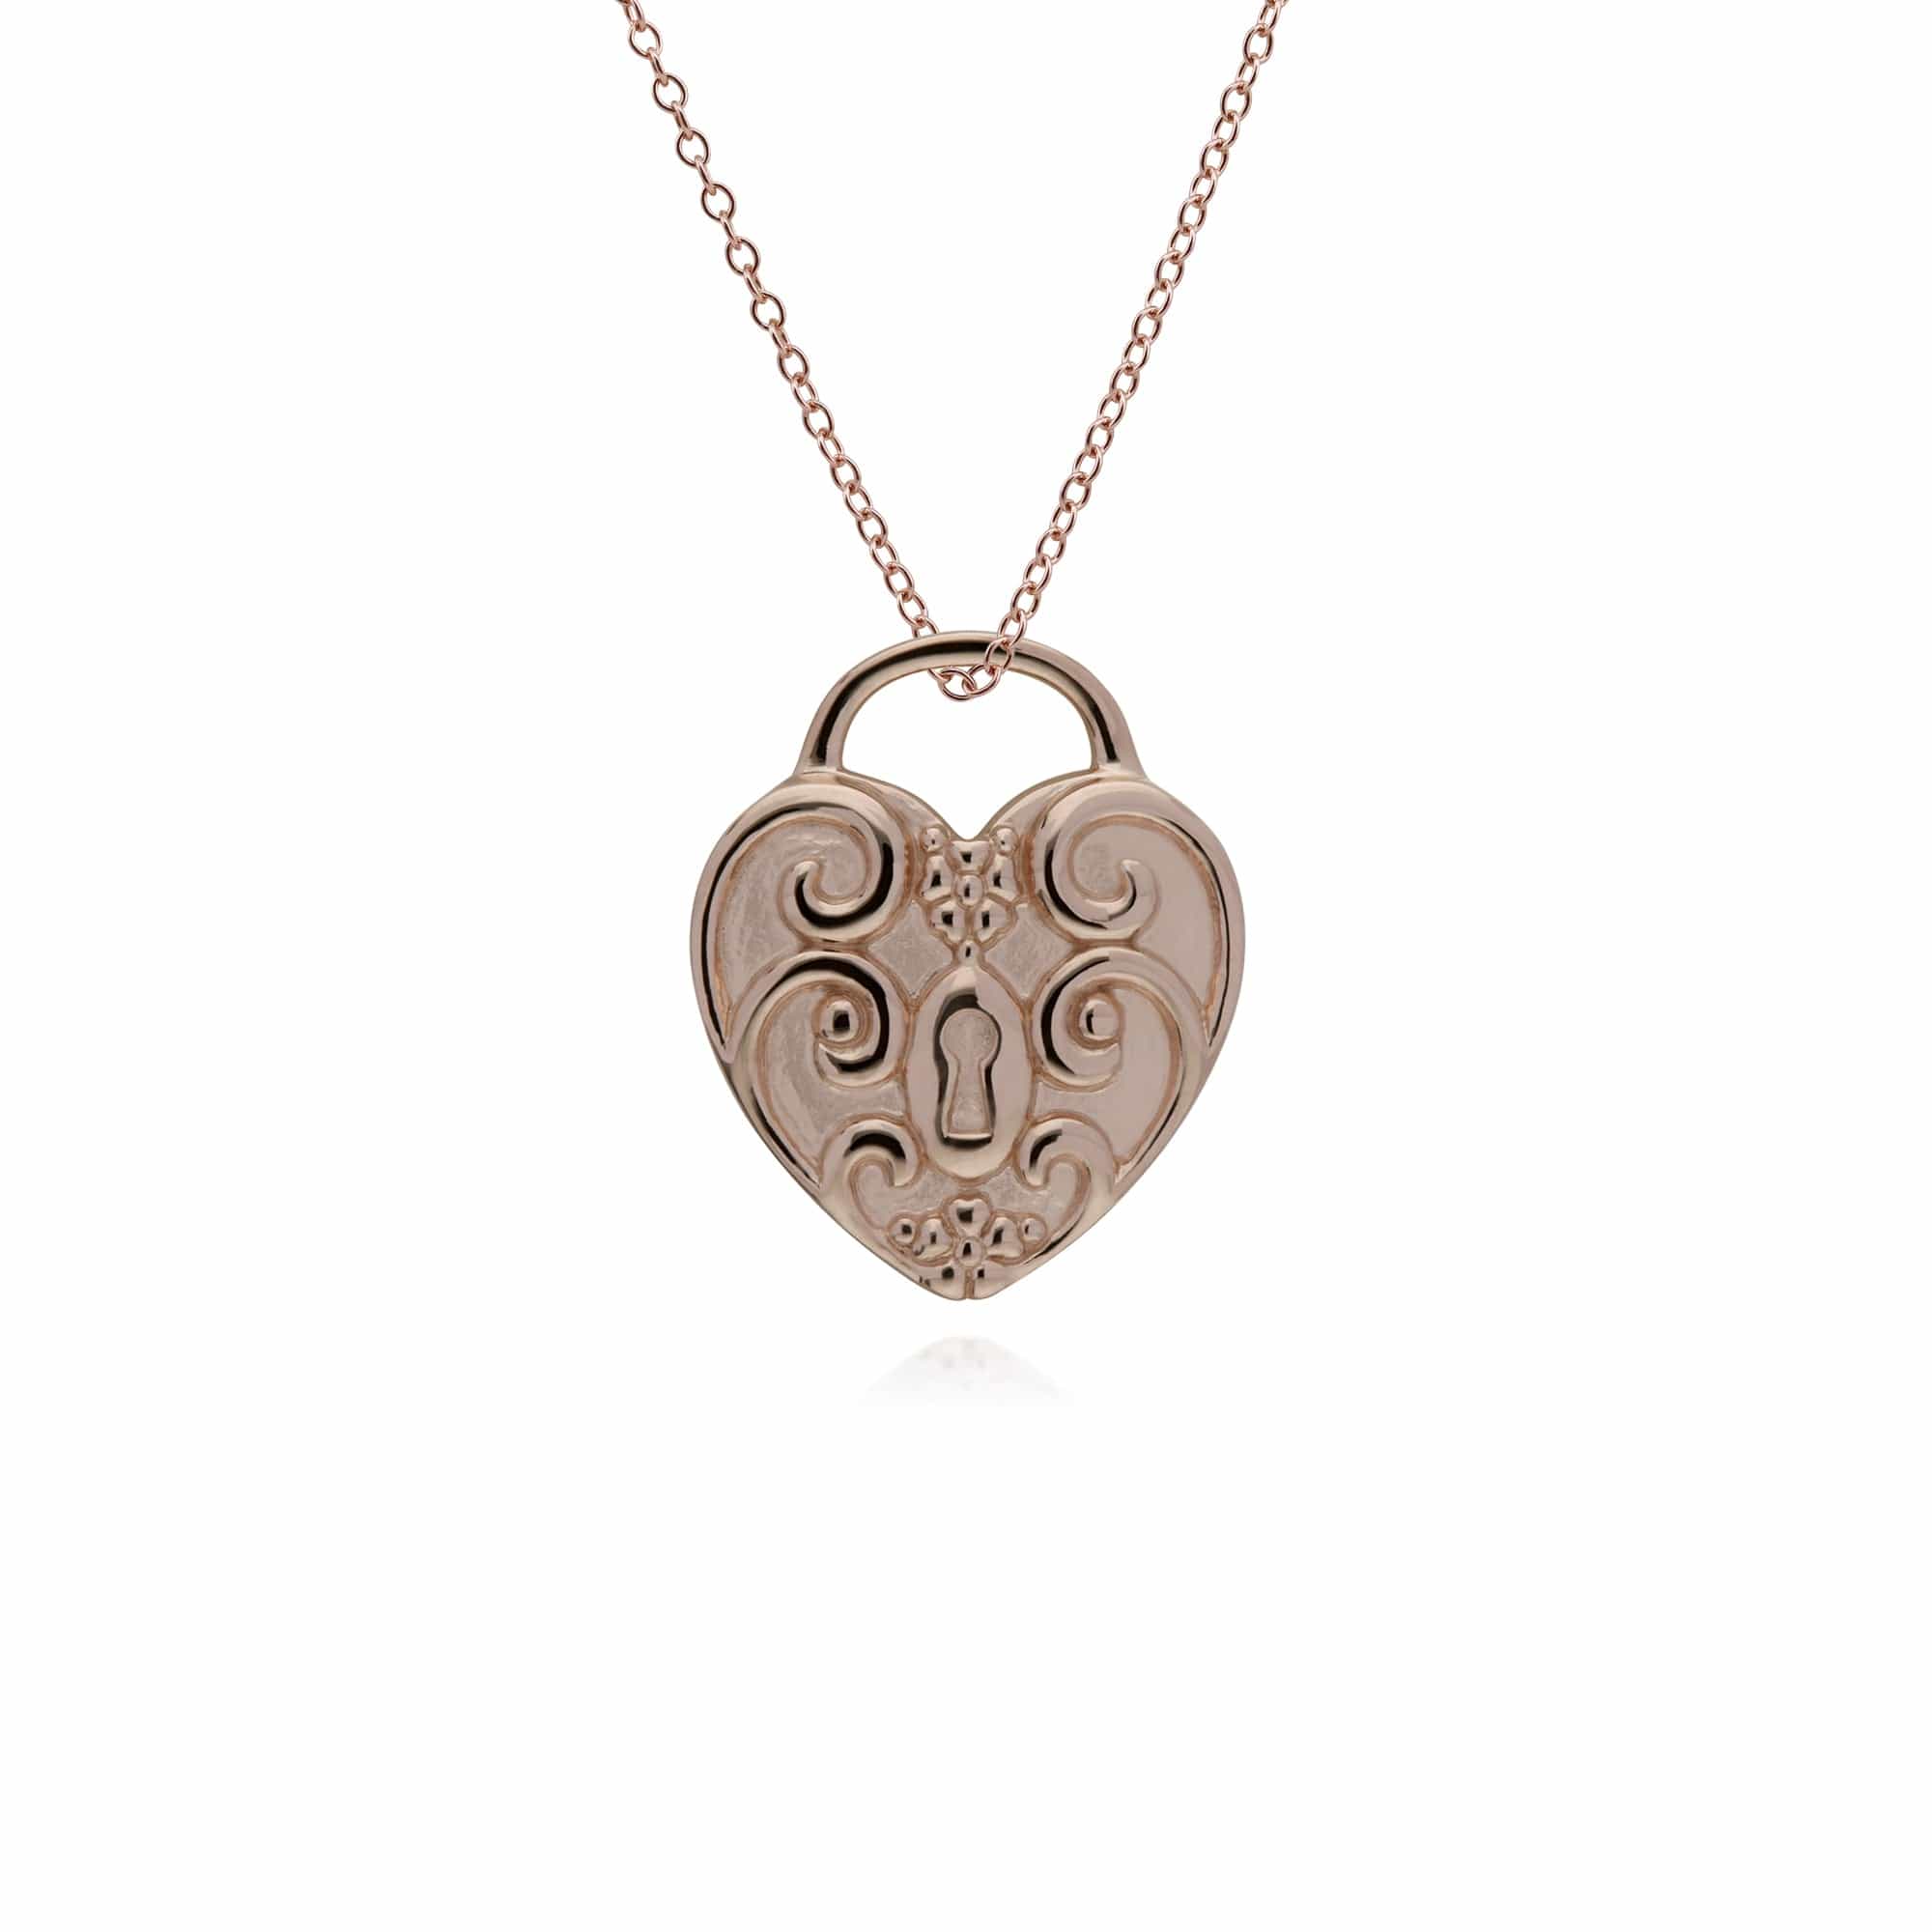 270P026309925-270P026501925 Classic Swirl Heart Lock Pendant & Aquamarine Key Charm in Rose Gold Plated 925 Sterling Silver 3